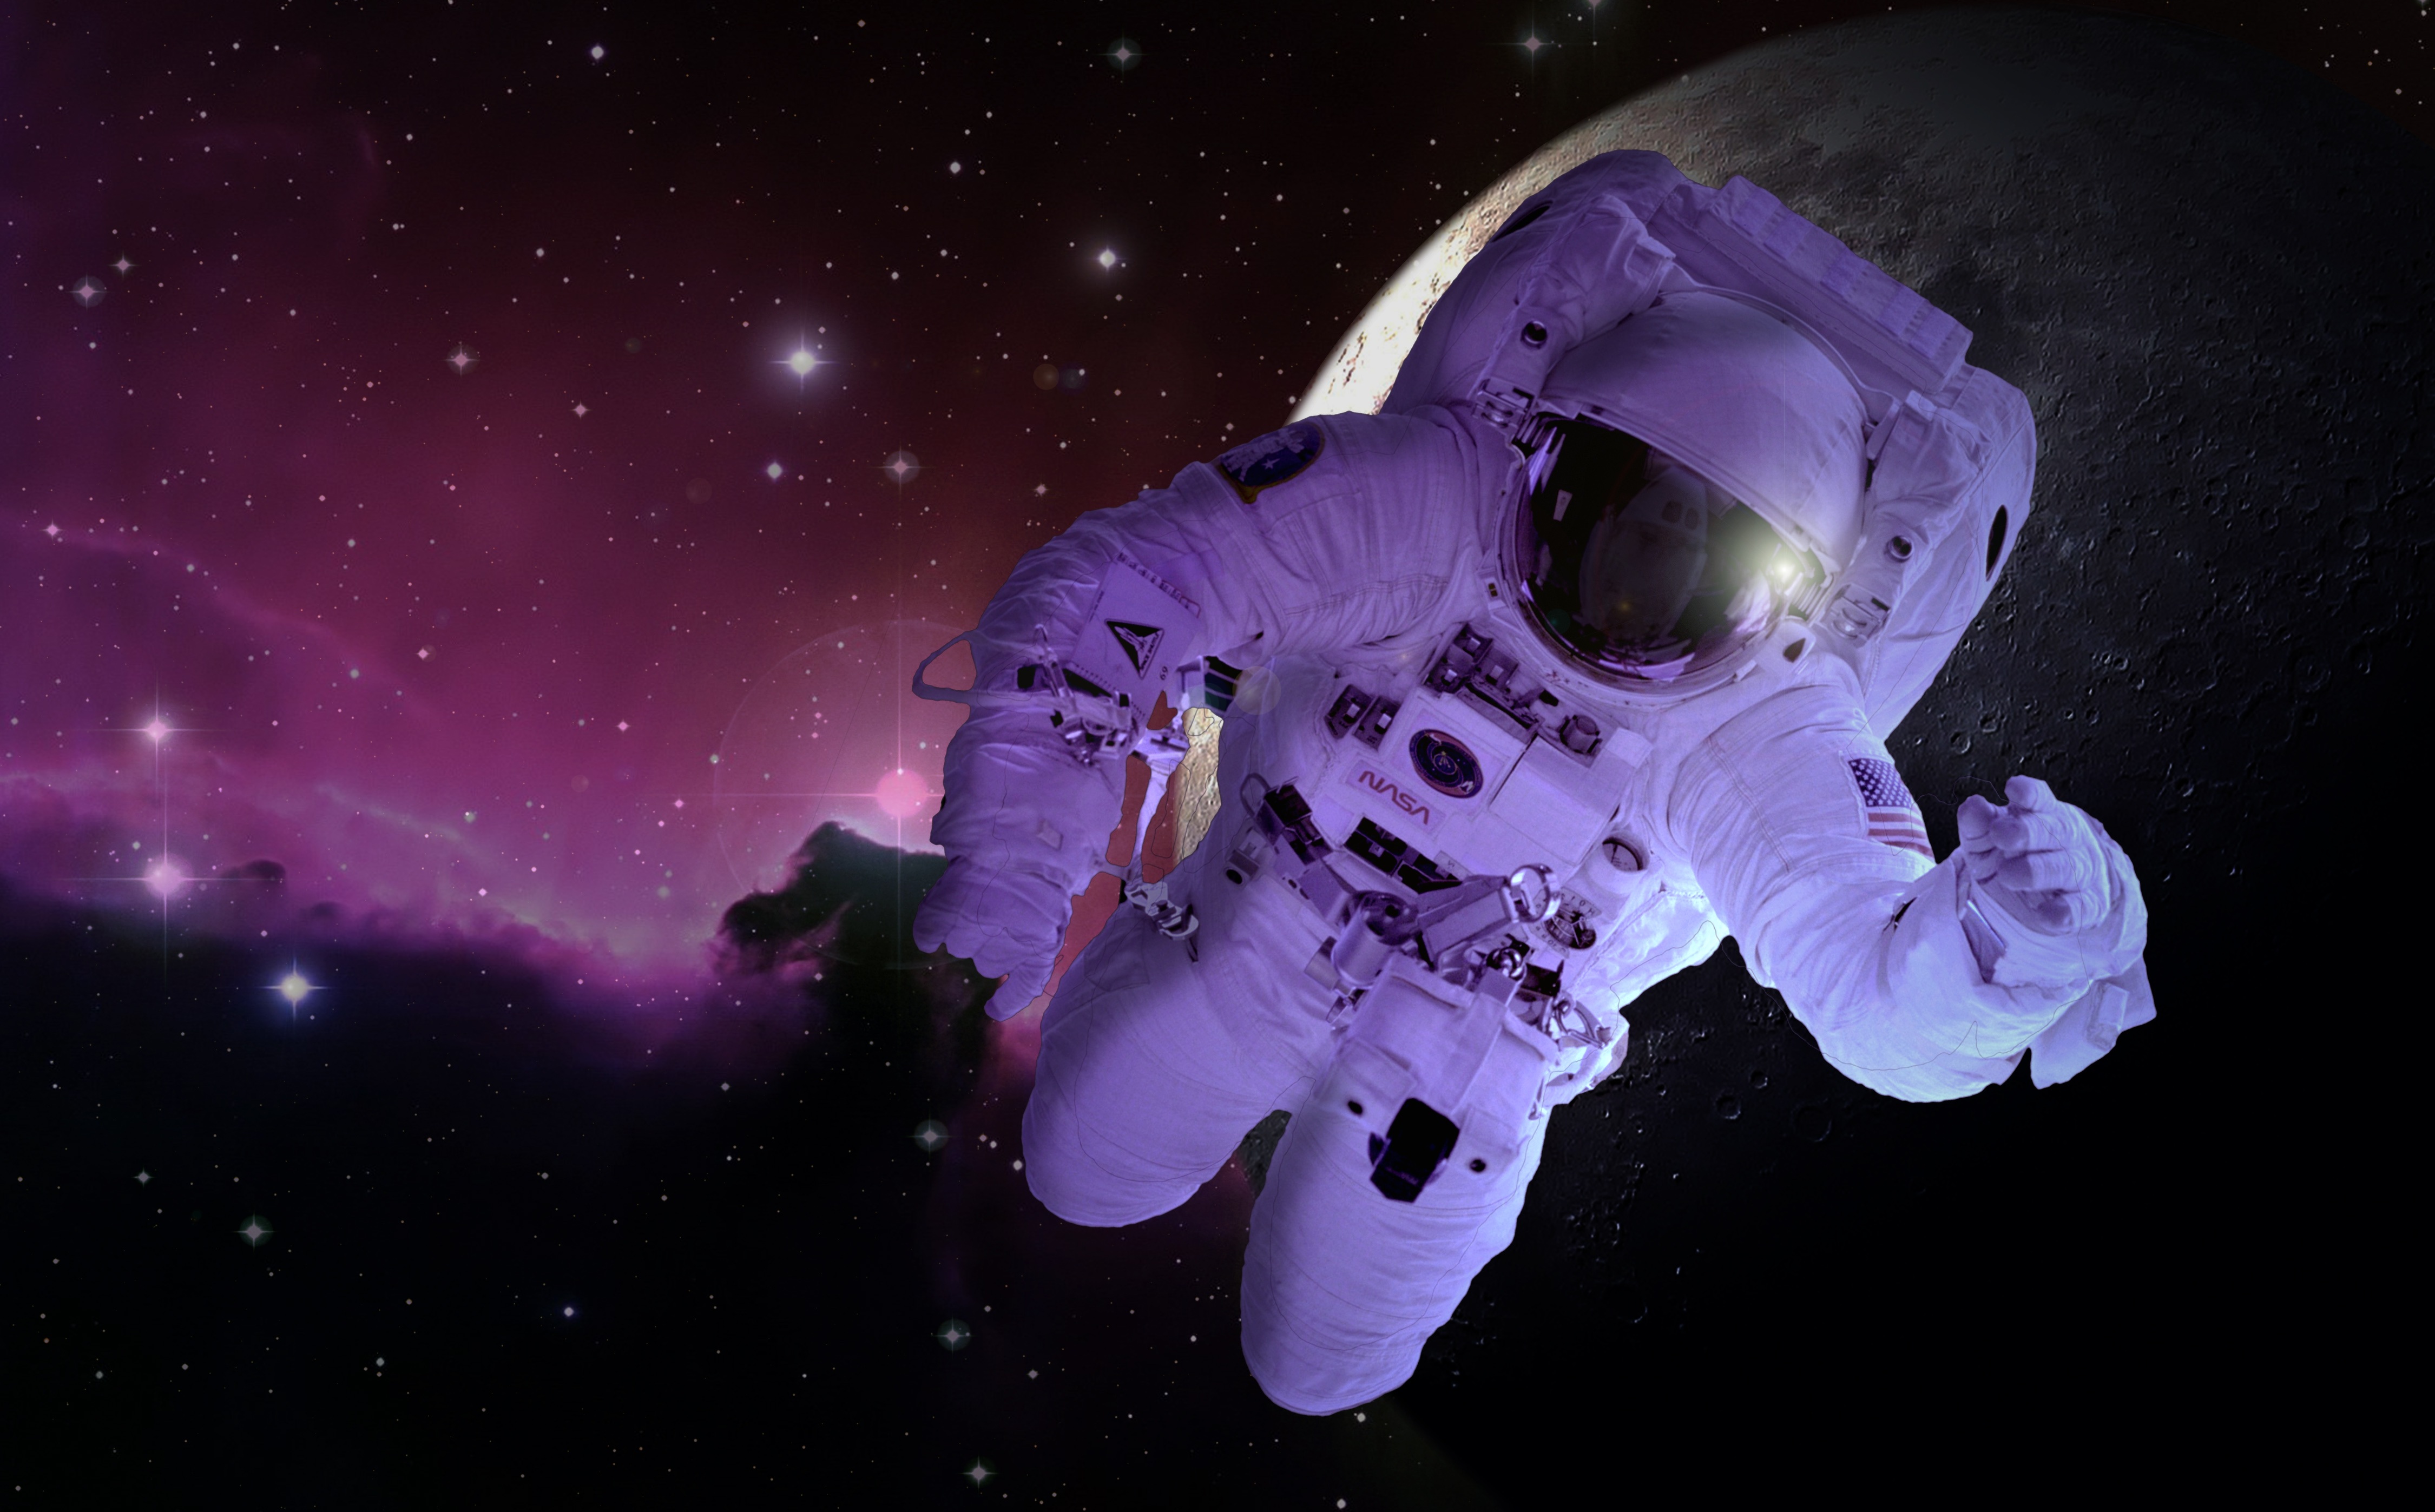 Free photo A picture of an astronaut against a pink space nebula.